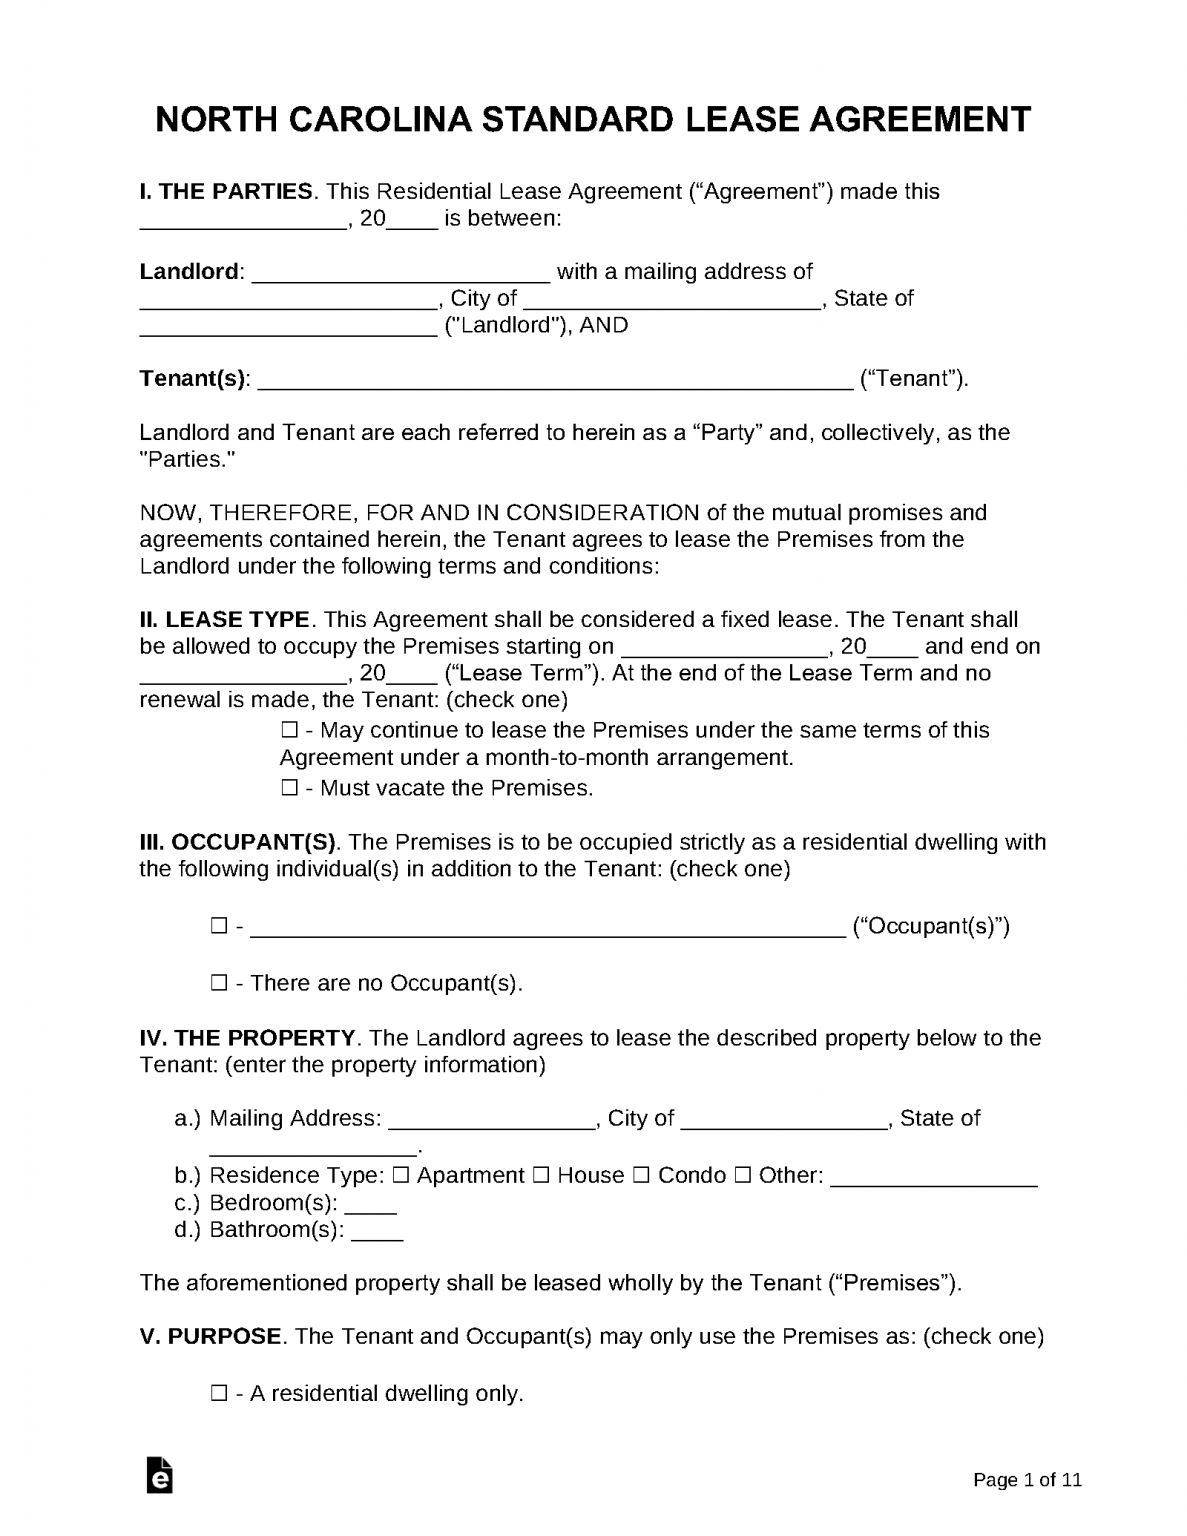 free-north-carolina-standard-residential-lease-agreement-template-pdf-word-eforms